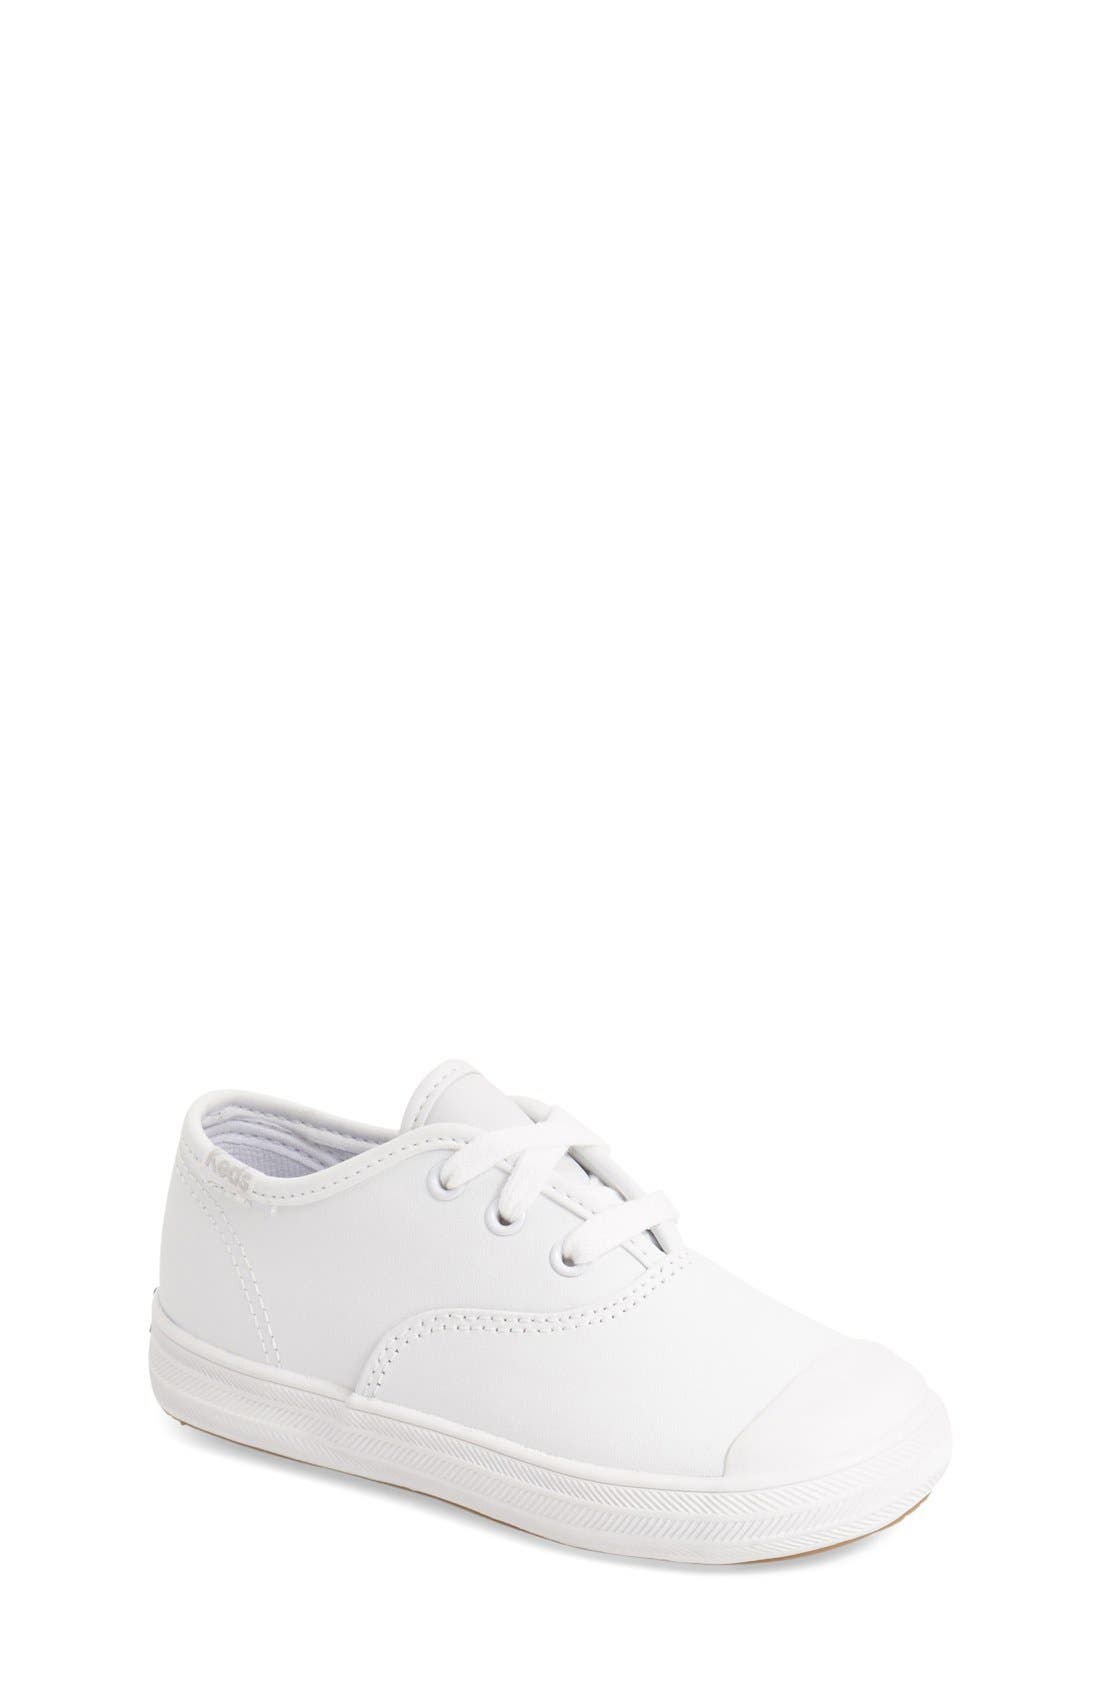 nordstrom rack baby boy shoes